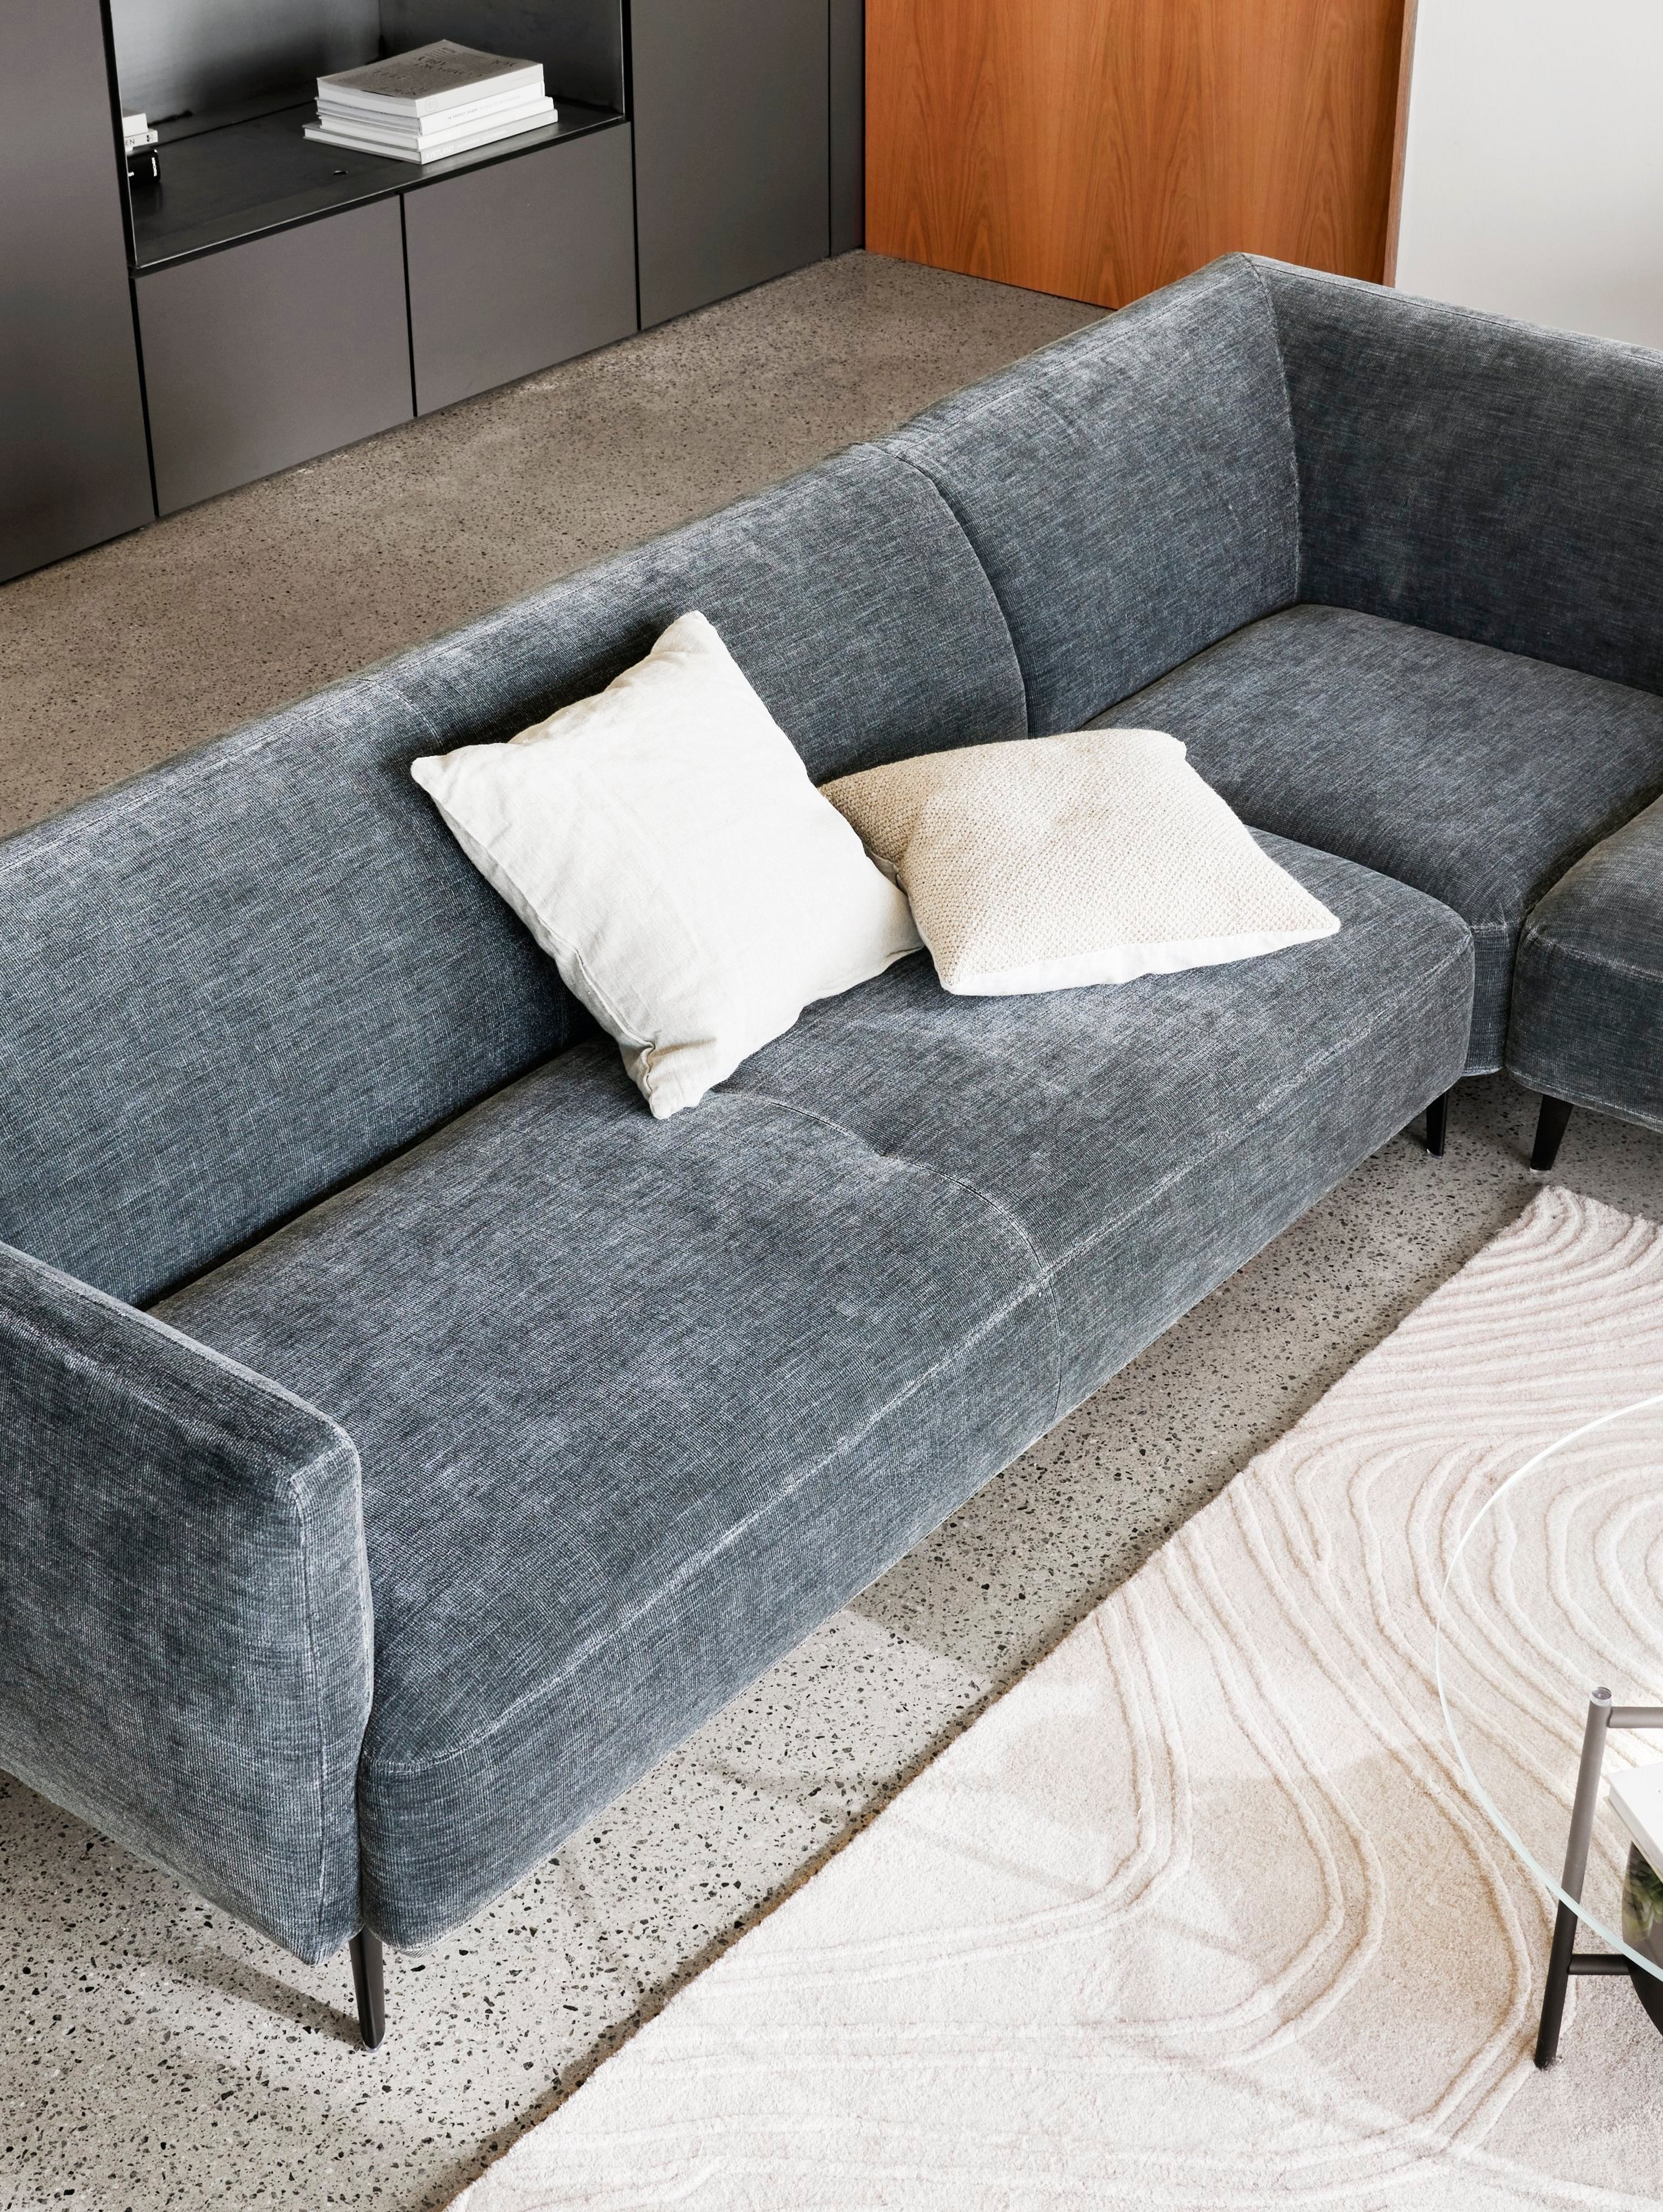 The Modena corner sofa with the Madrid coffee table.